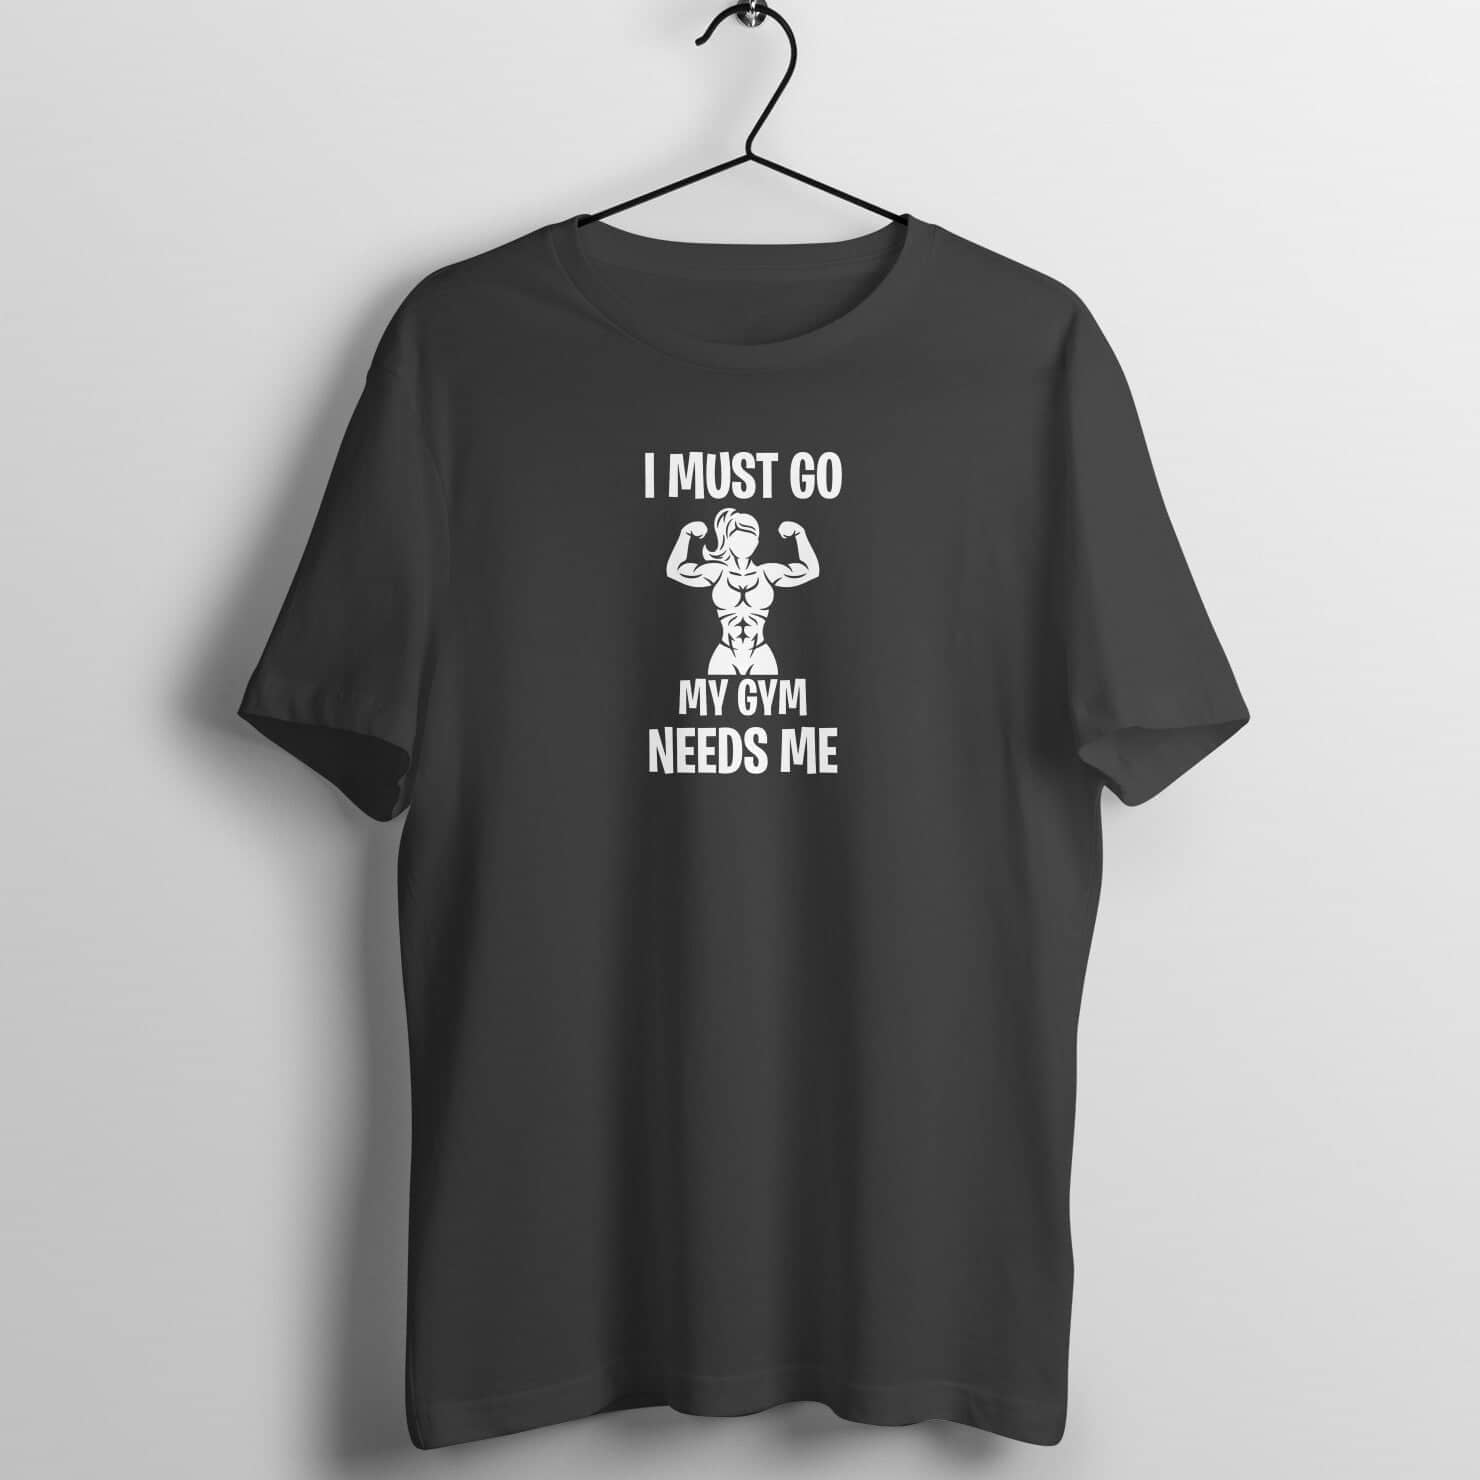 I Must Go to the Gym Exclusive Workout T Shirt for Women freeshipping - Catch My Drift India